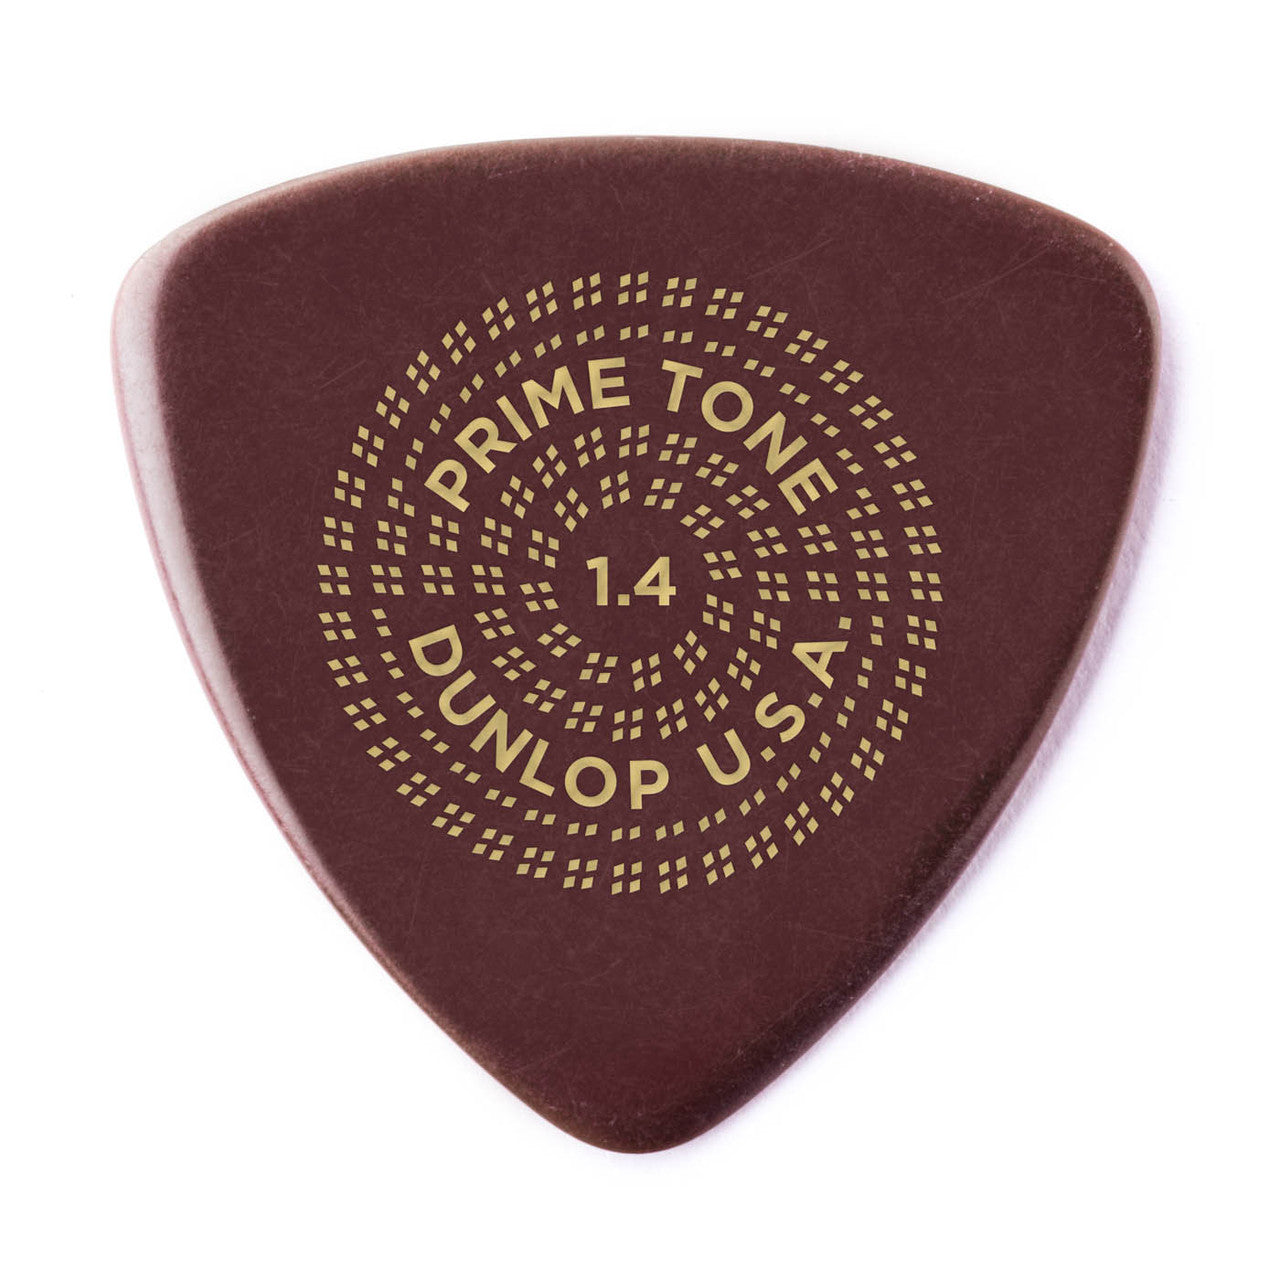 Dunlop 517 Primetone Small Triangle Smooth Pick 3xPack | Select Gauge